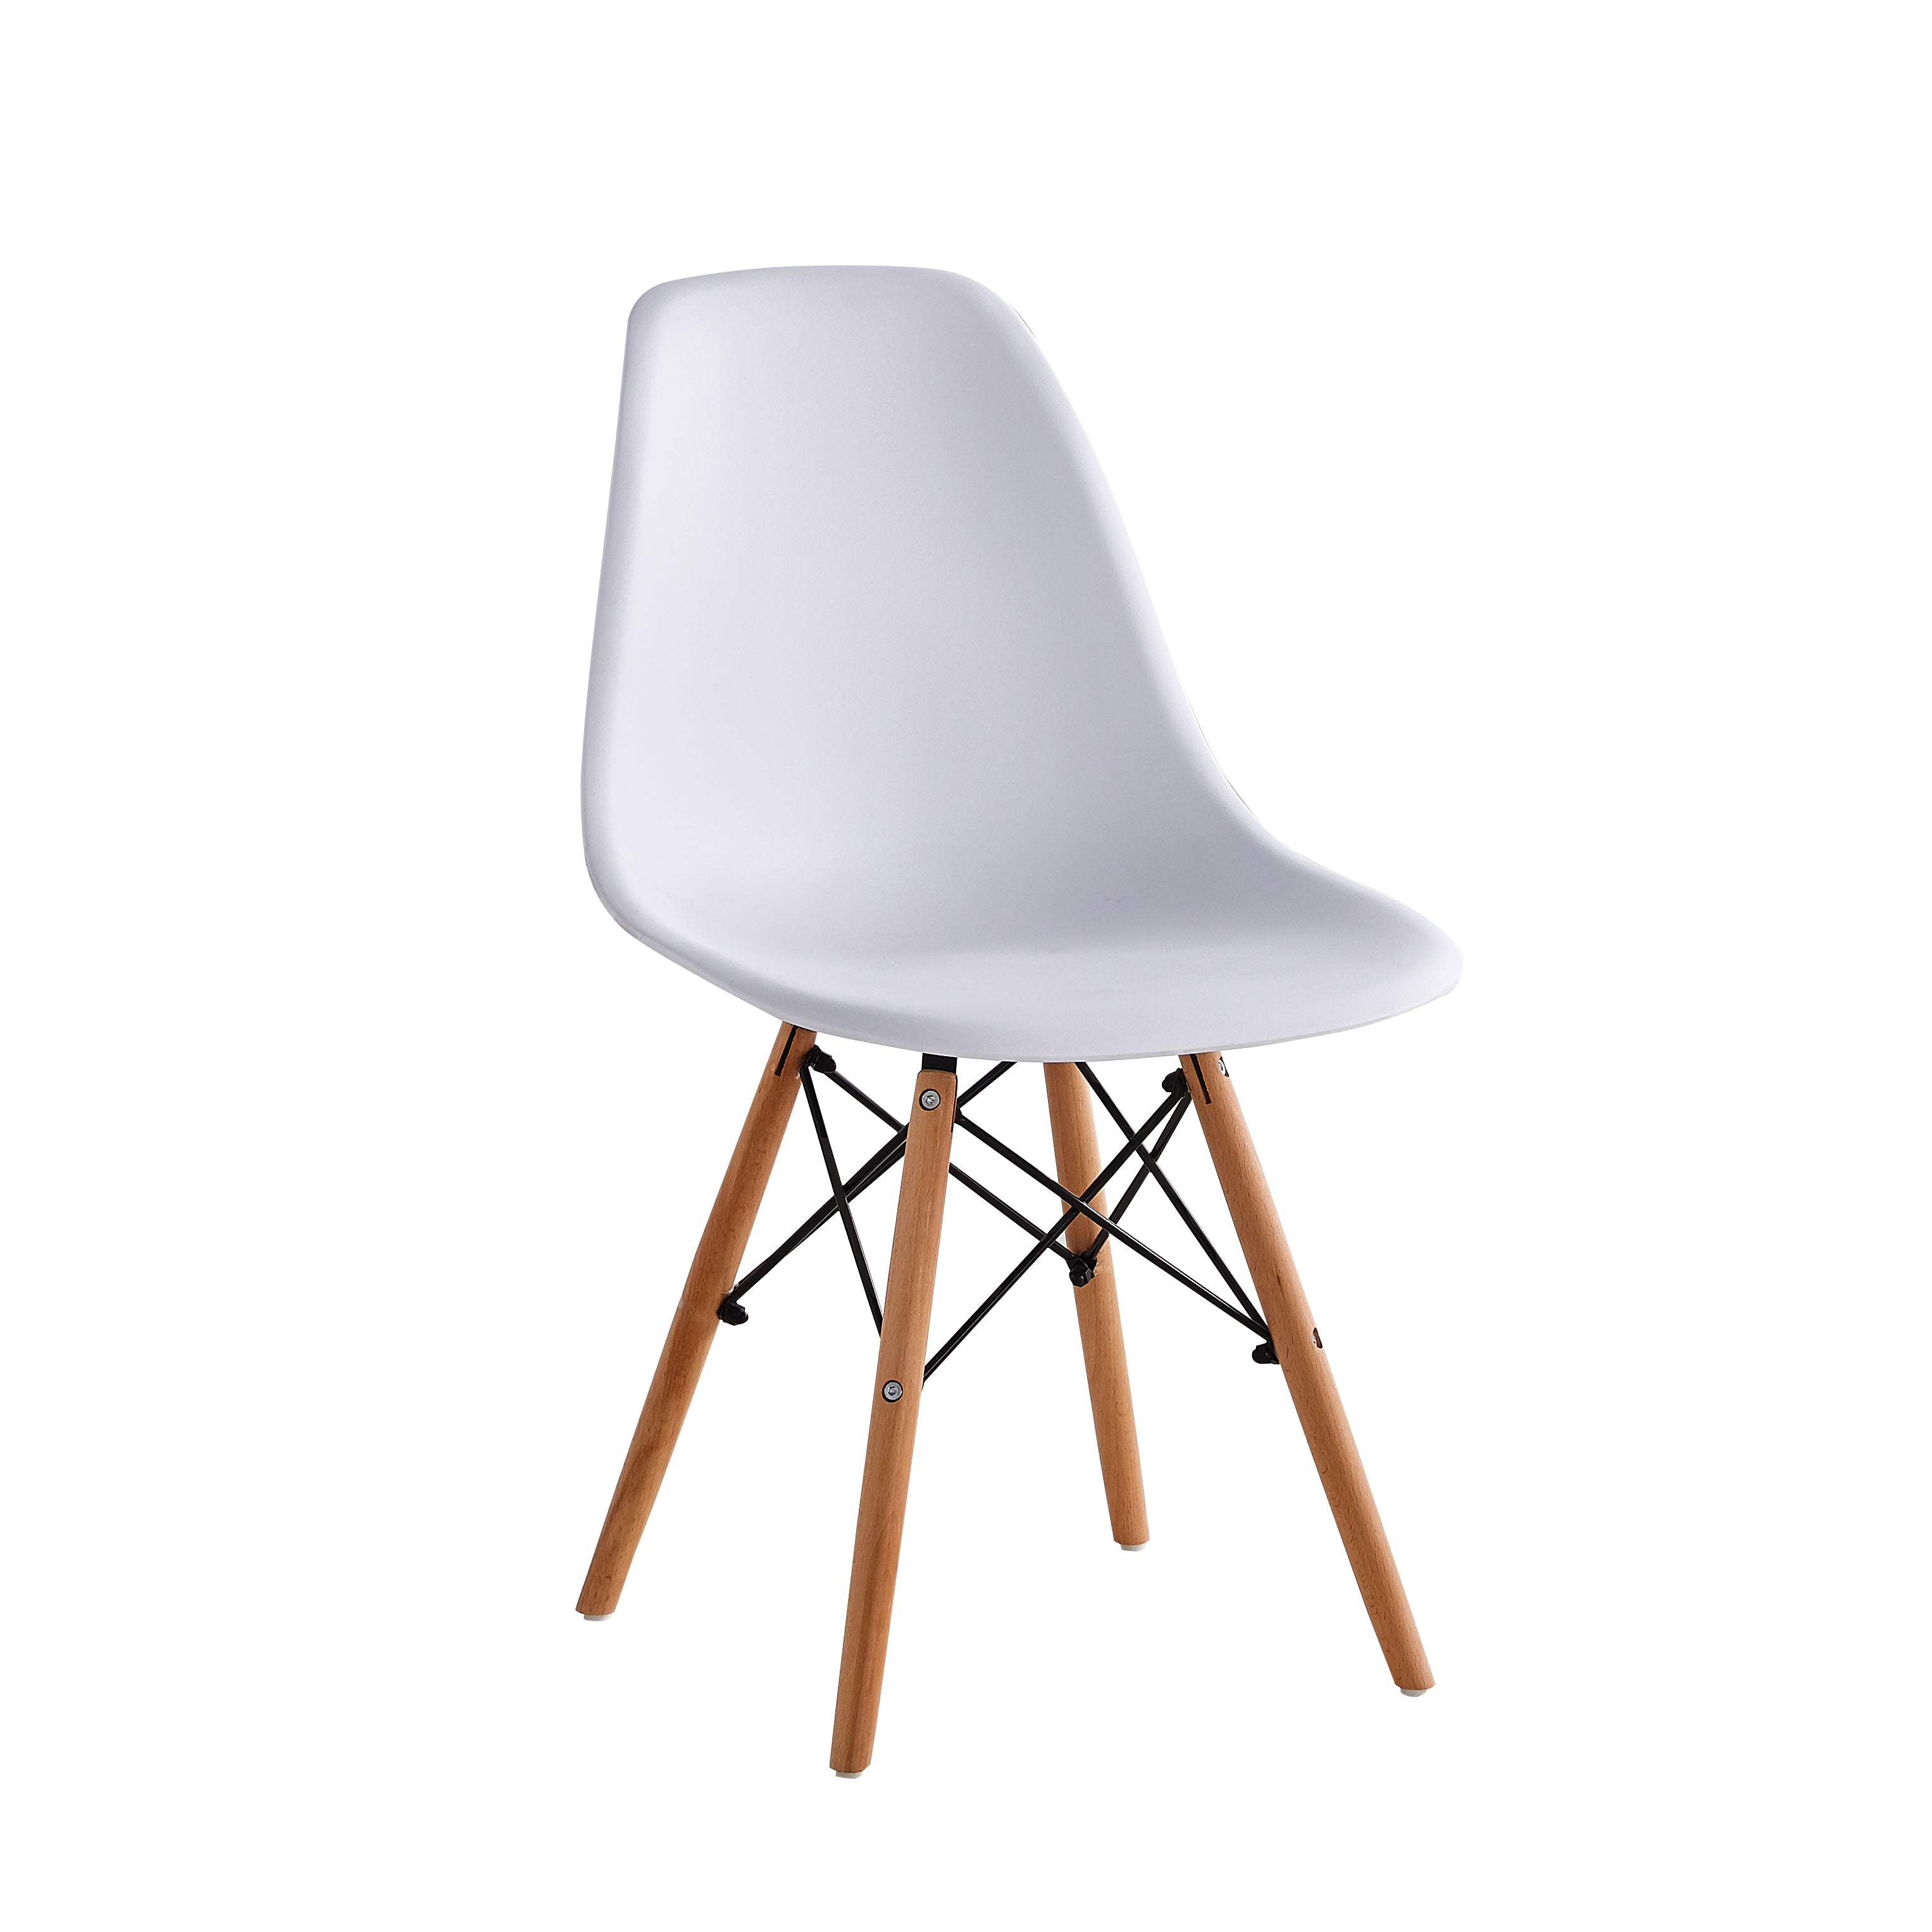 Eames Chair CR-PP623 4-in-1 multi-functional design furniture0